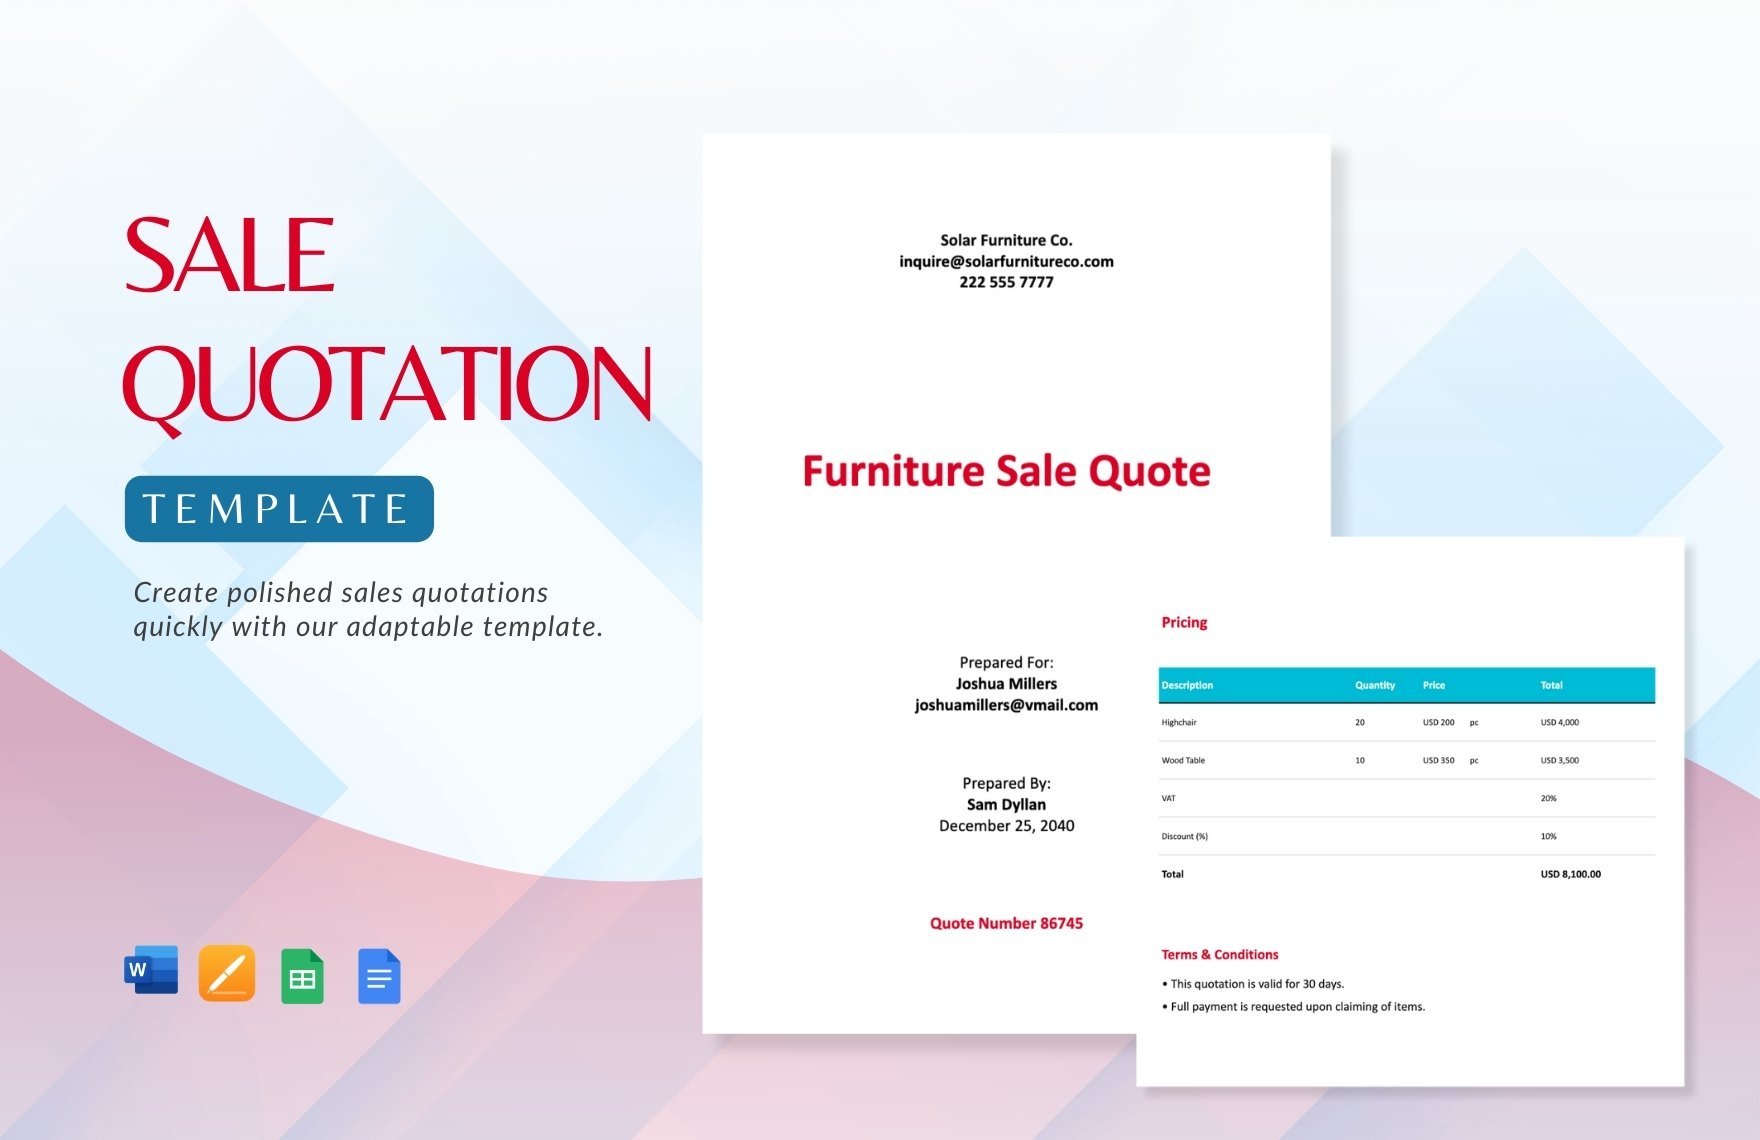 Sale Quotation Template in Word, Google Docs, Google Sheets, Apple Pages